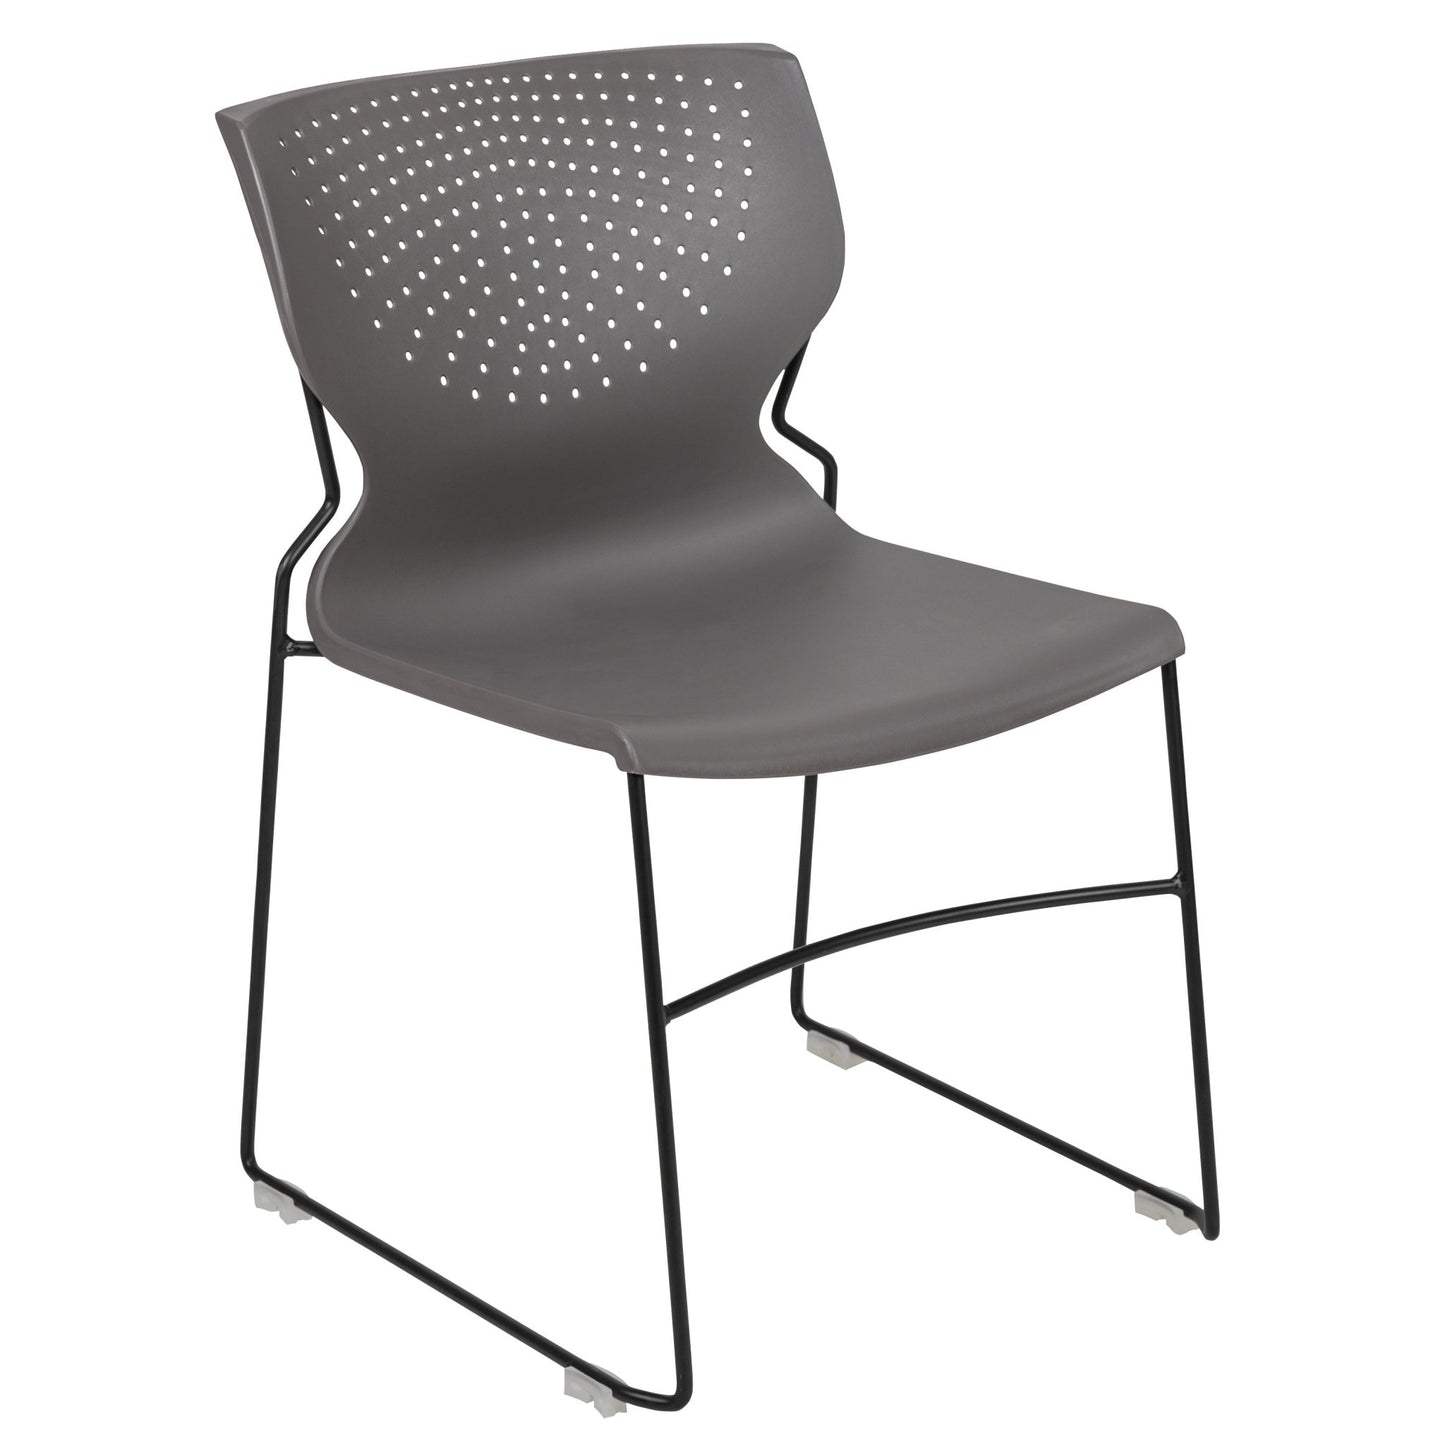 HERCULES Series 661 lb. Capacity Full Back Stack Chair with Powder Coated Frame - SchoolOutlet